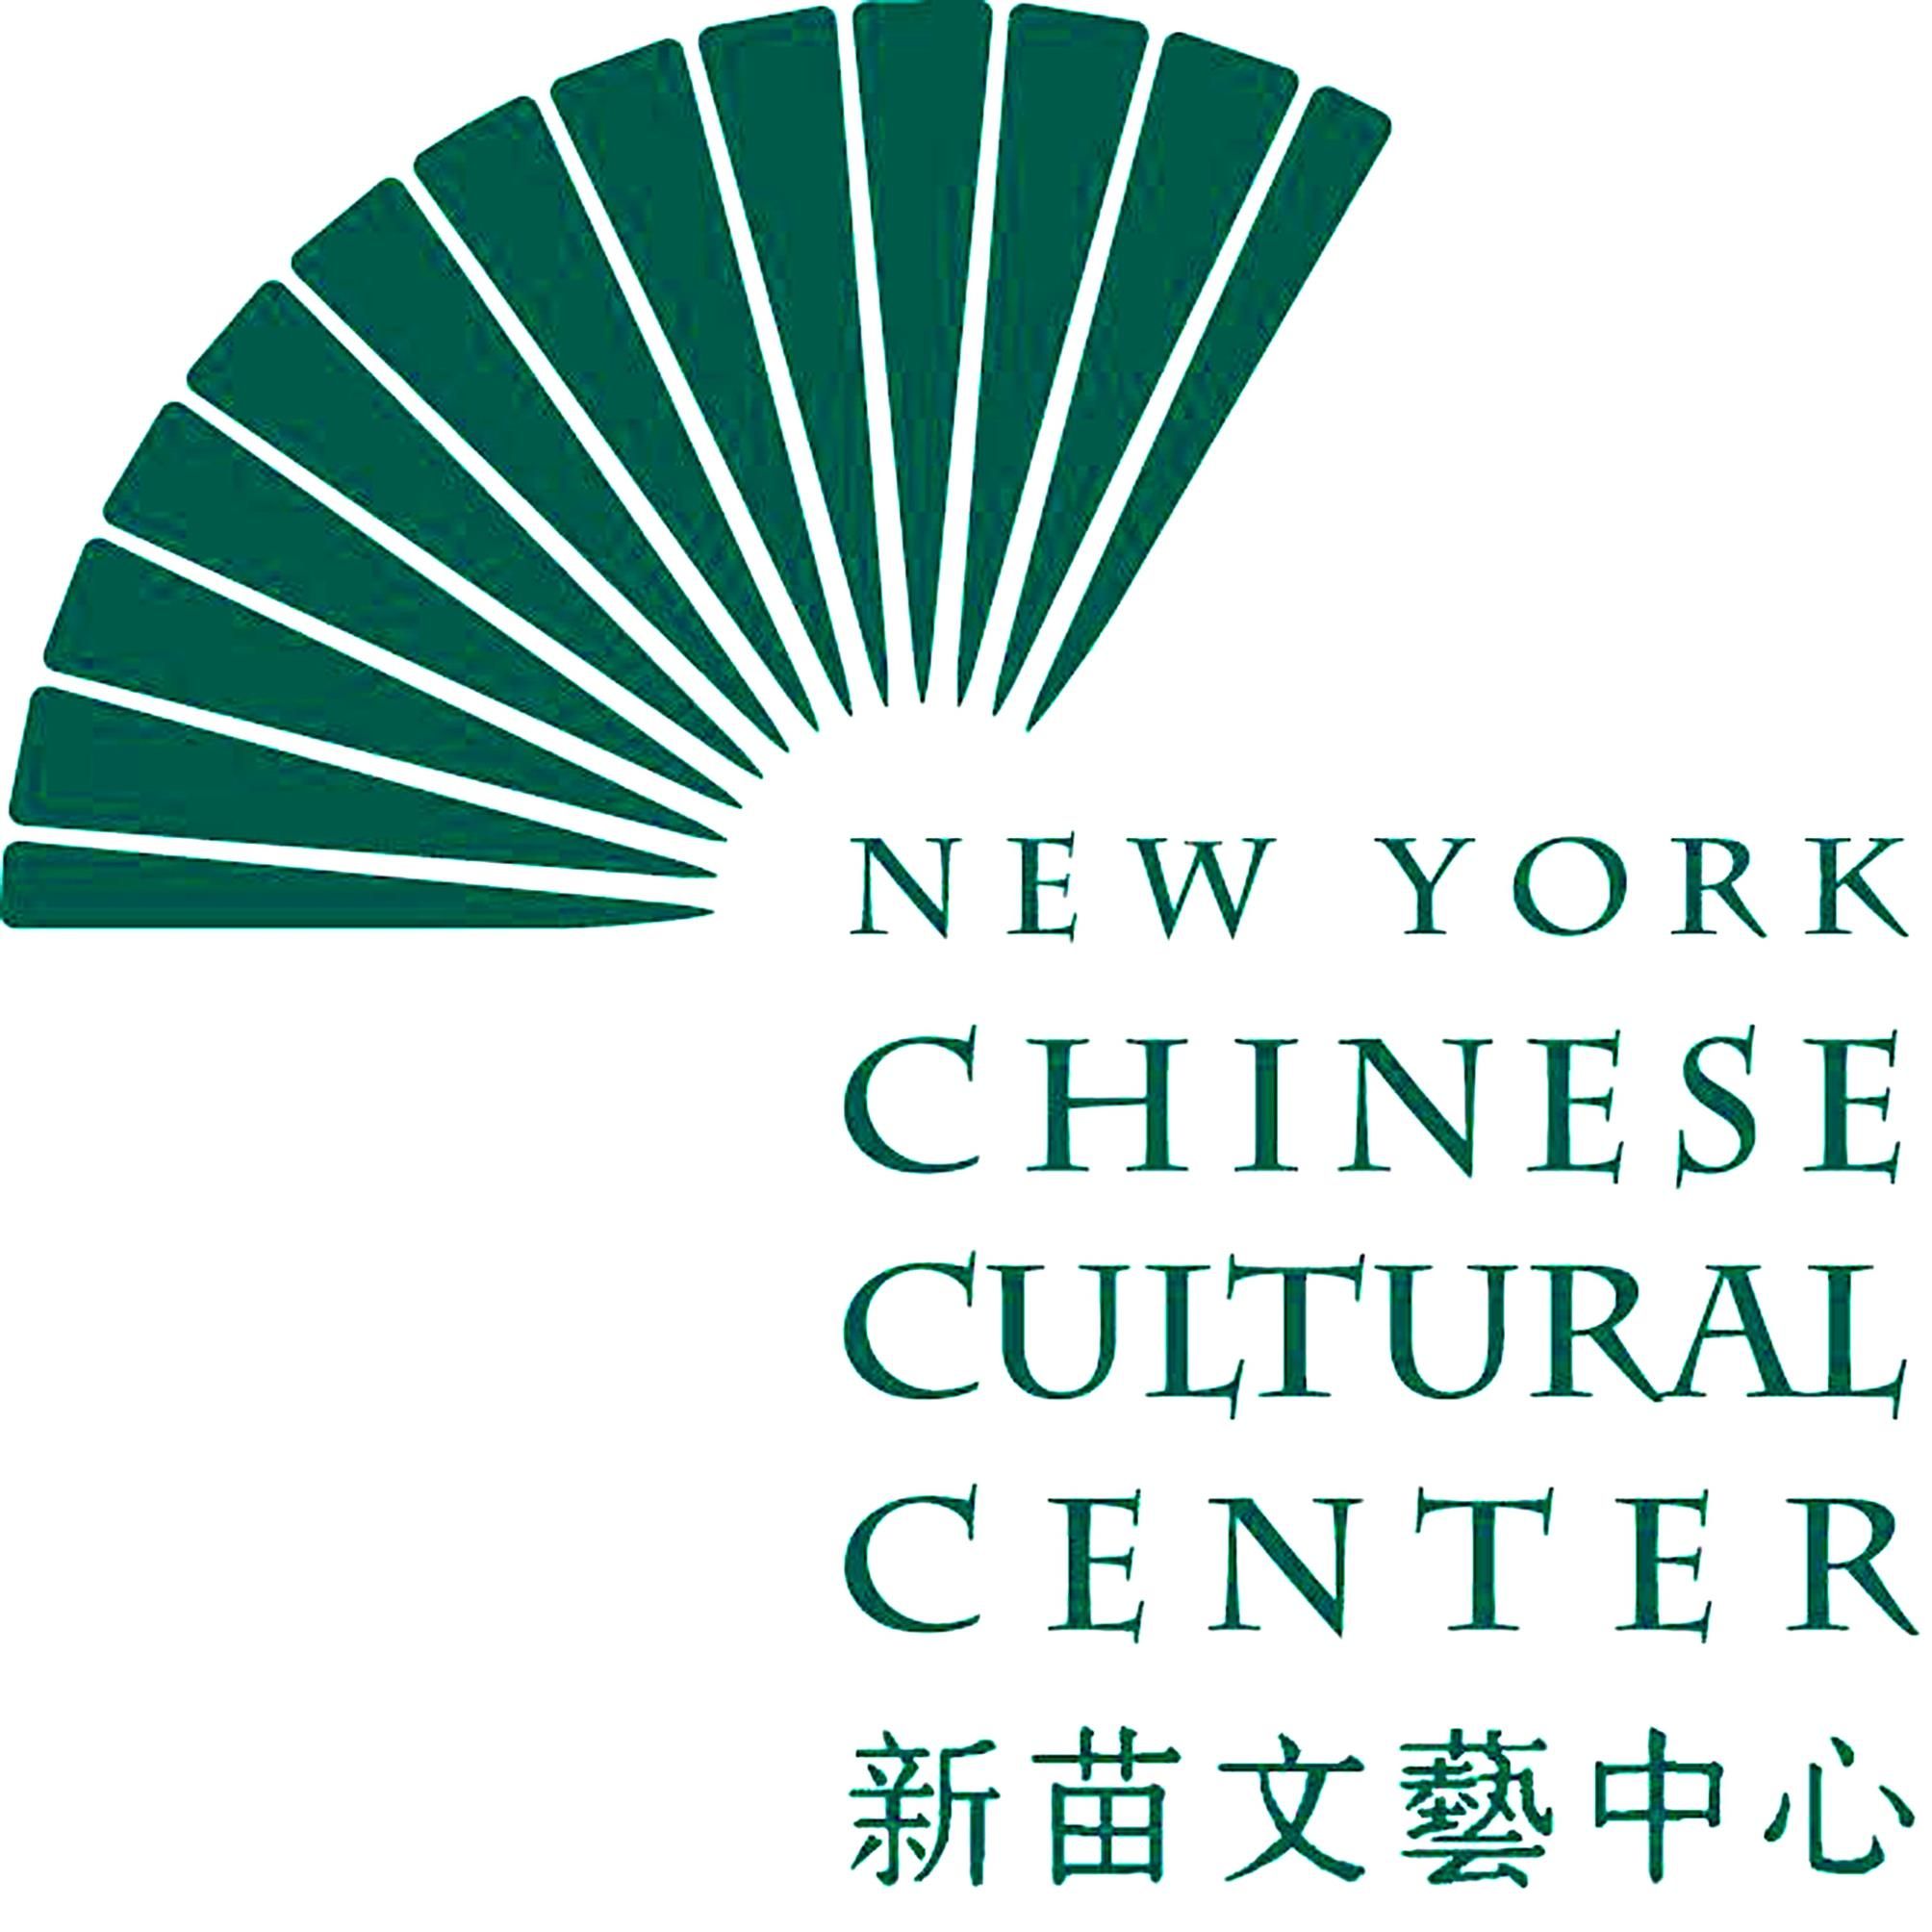 Chinese Organizations in New York - New York Chinese Cultural Center